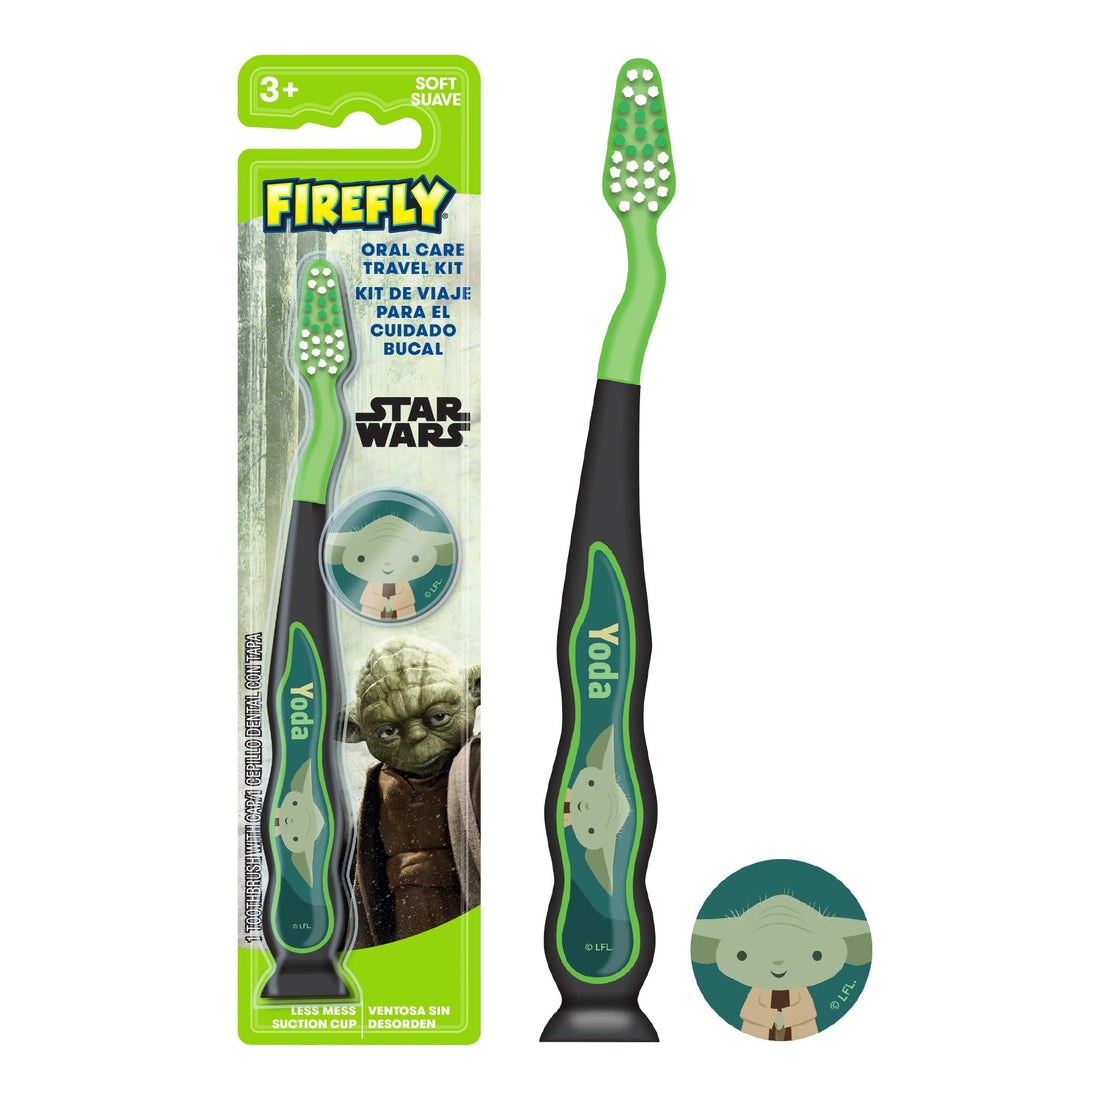 Firefly Kids Star Wars Travel Kit, Soft Bristled Toothbrushes, Ages 3+, 1 Count (Character May Vary), Yoda